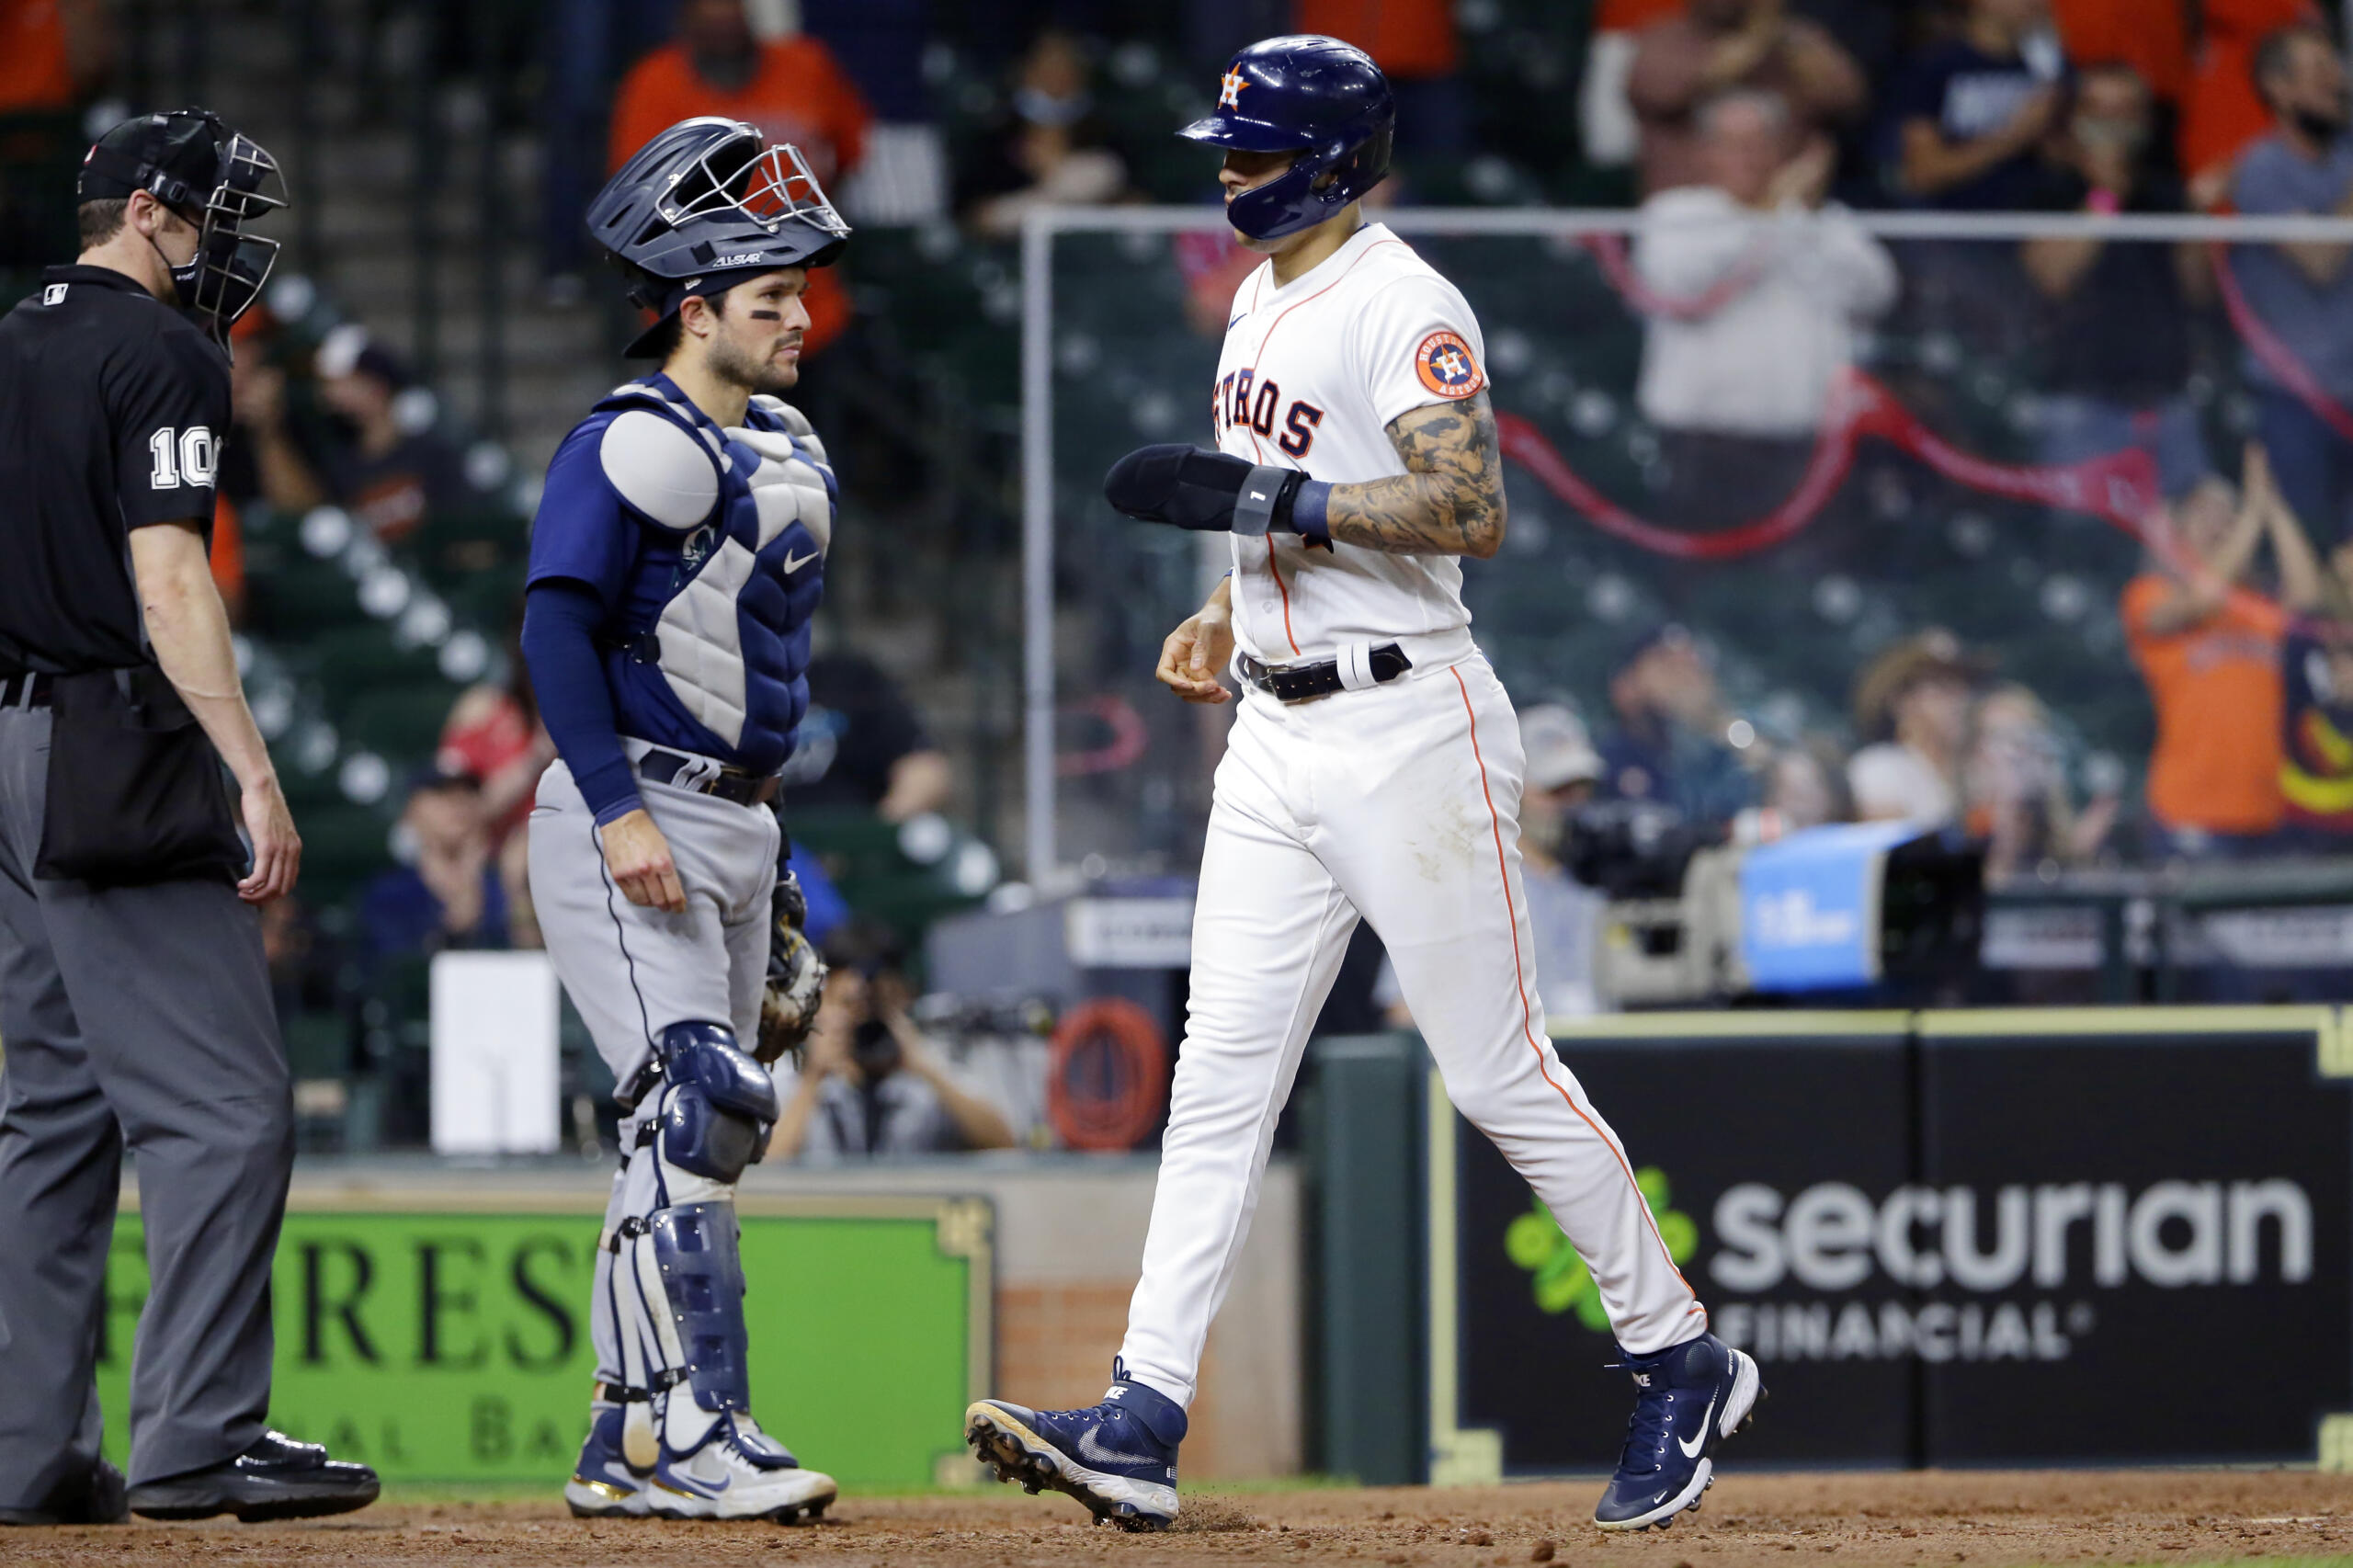 Houston Astros' Carlos Correa, right, crosses the plate in front of Seattle Mariners catcher Luis Torrens, middle, to score the go-ahead run on a walk issued to Myles Straw with the bases loaded during the eighth inning of a baseball game Wednesday, April 28, 2021, in Houston.